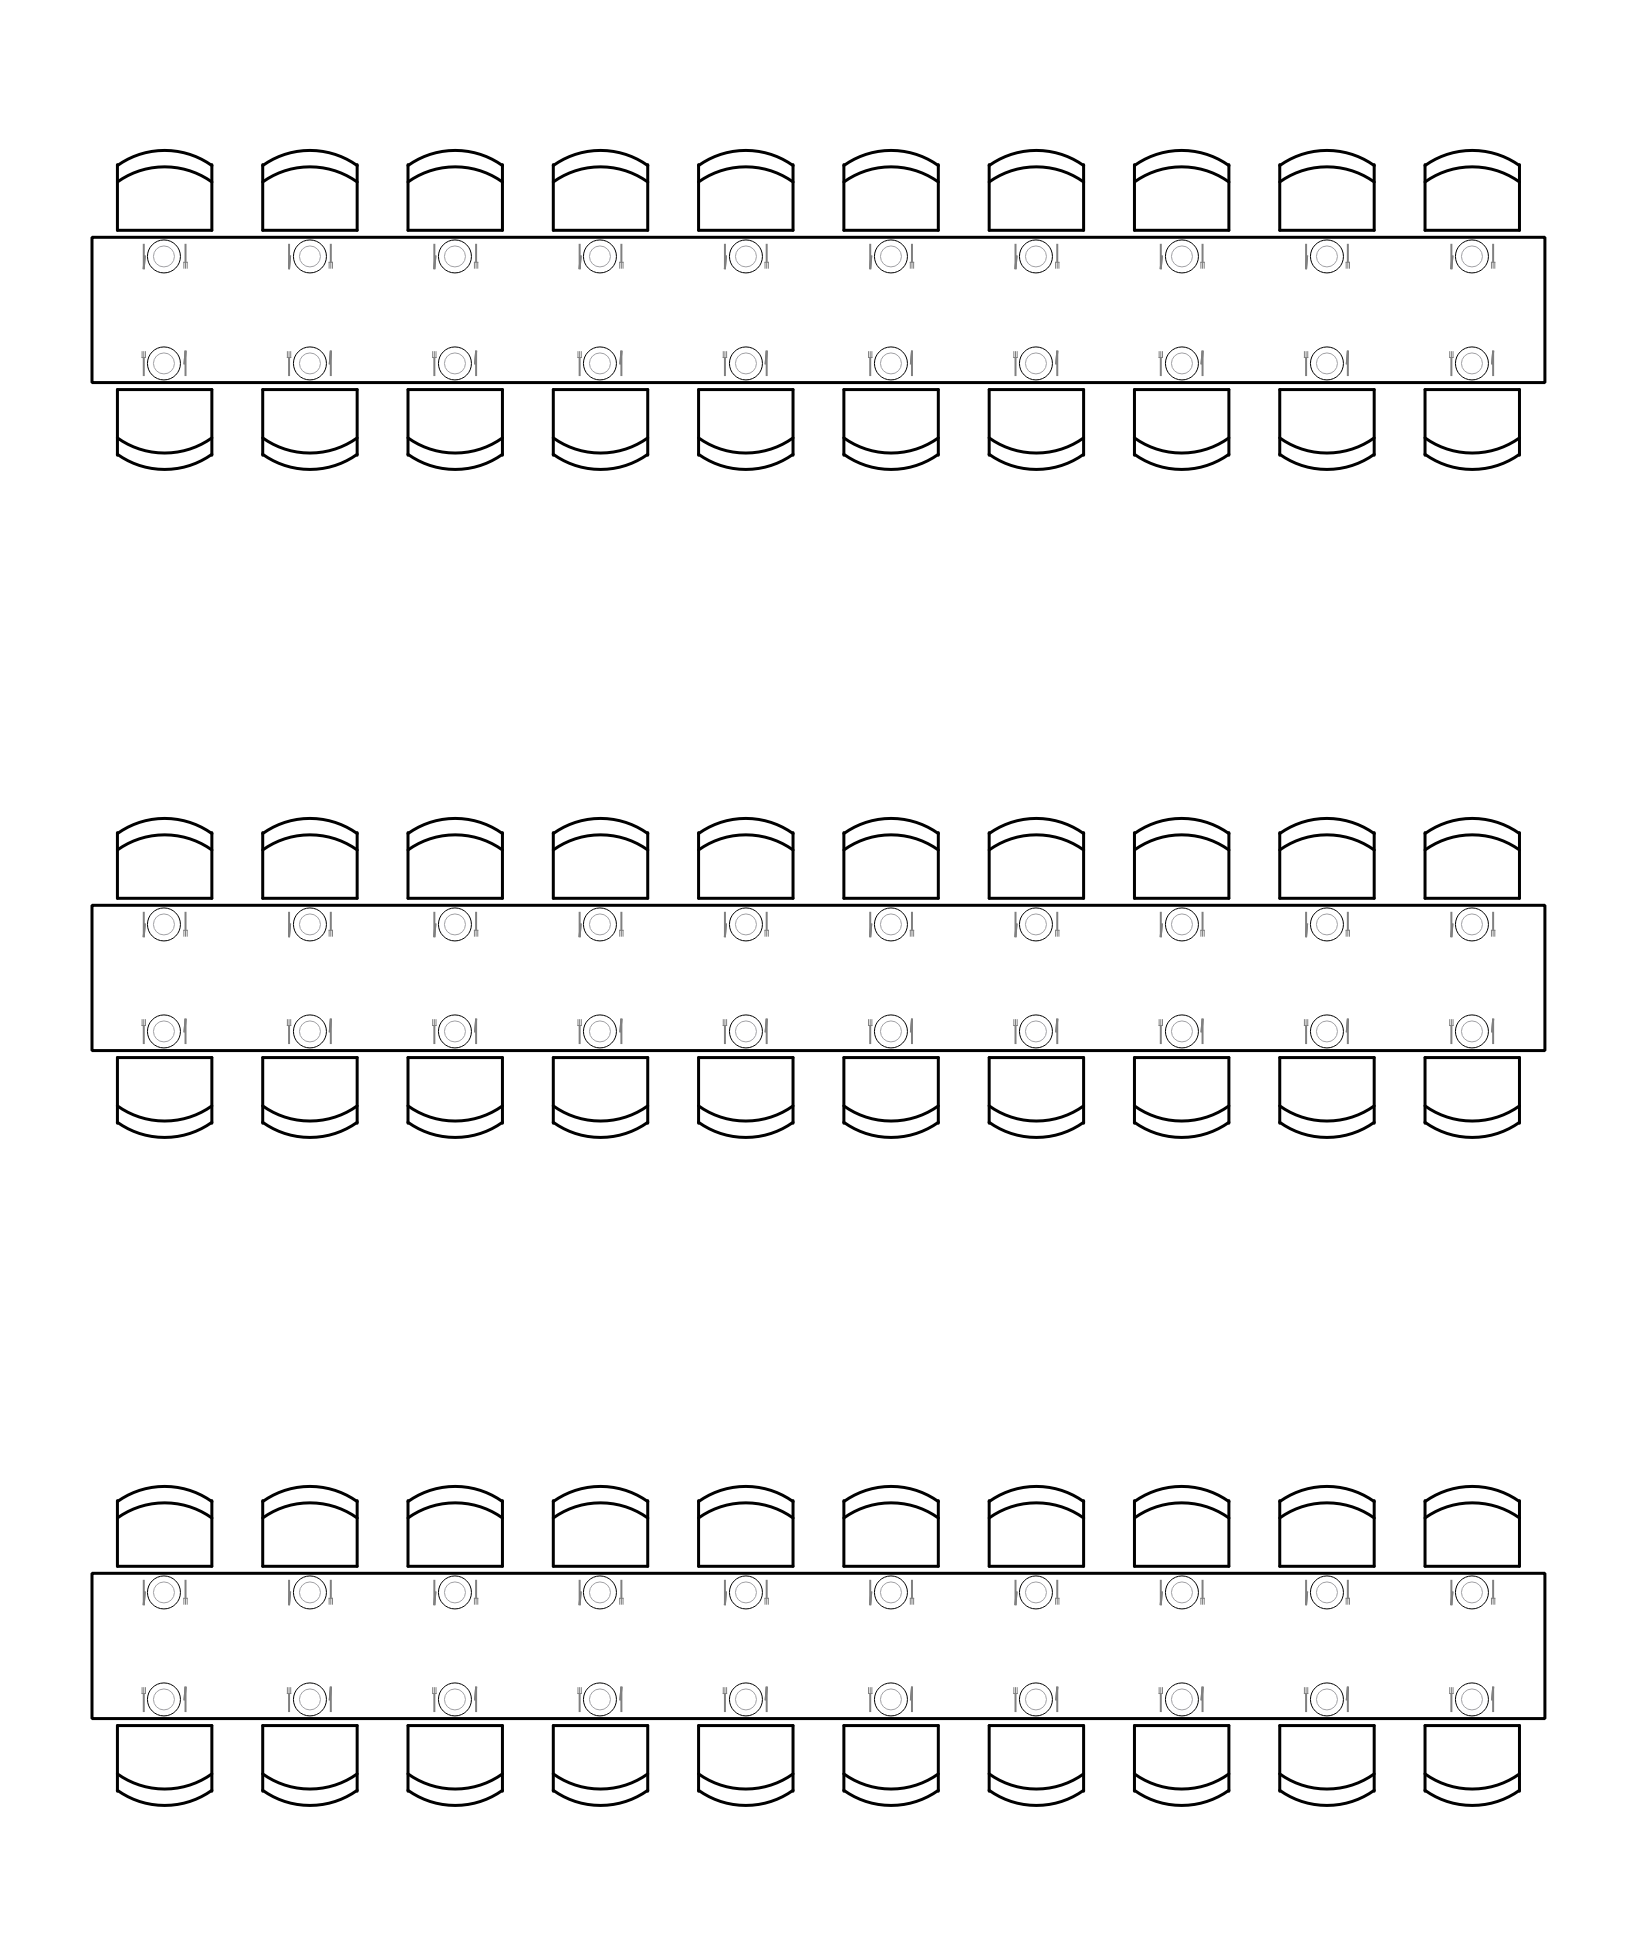 How To Do A Seating Chart For Long Tables